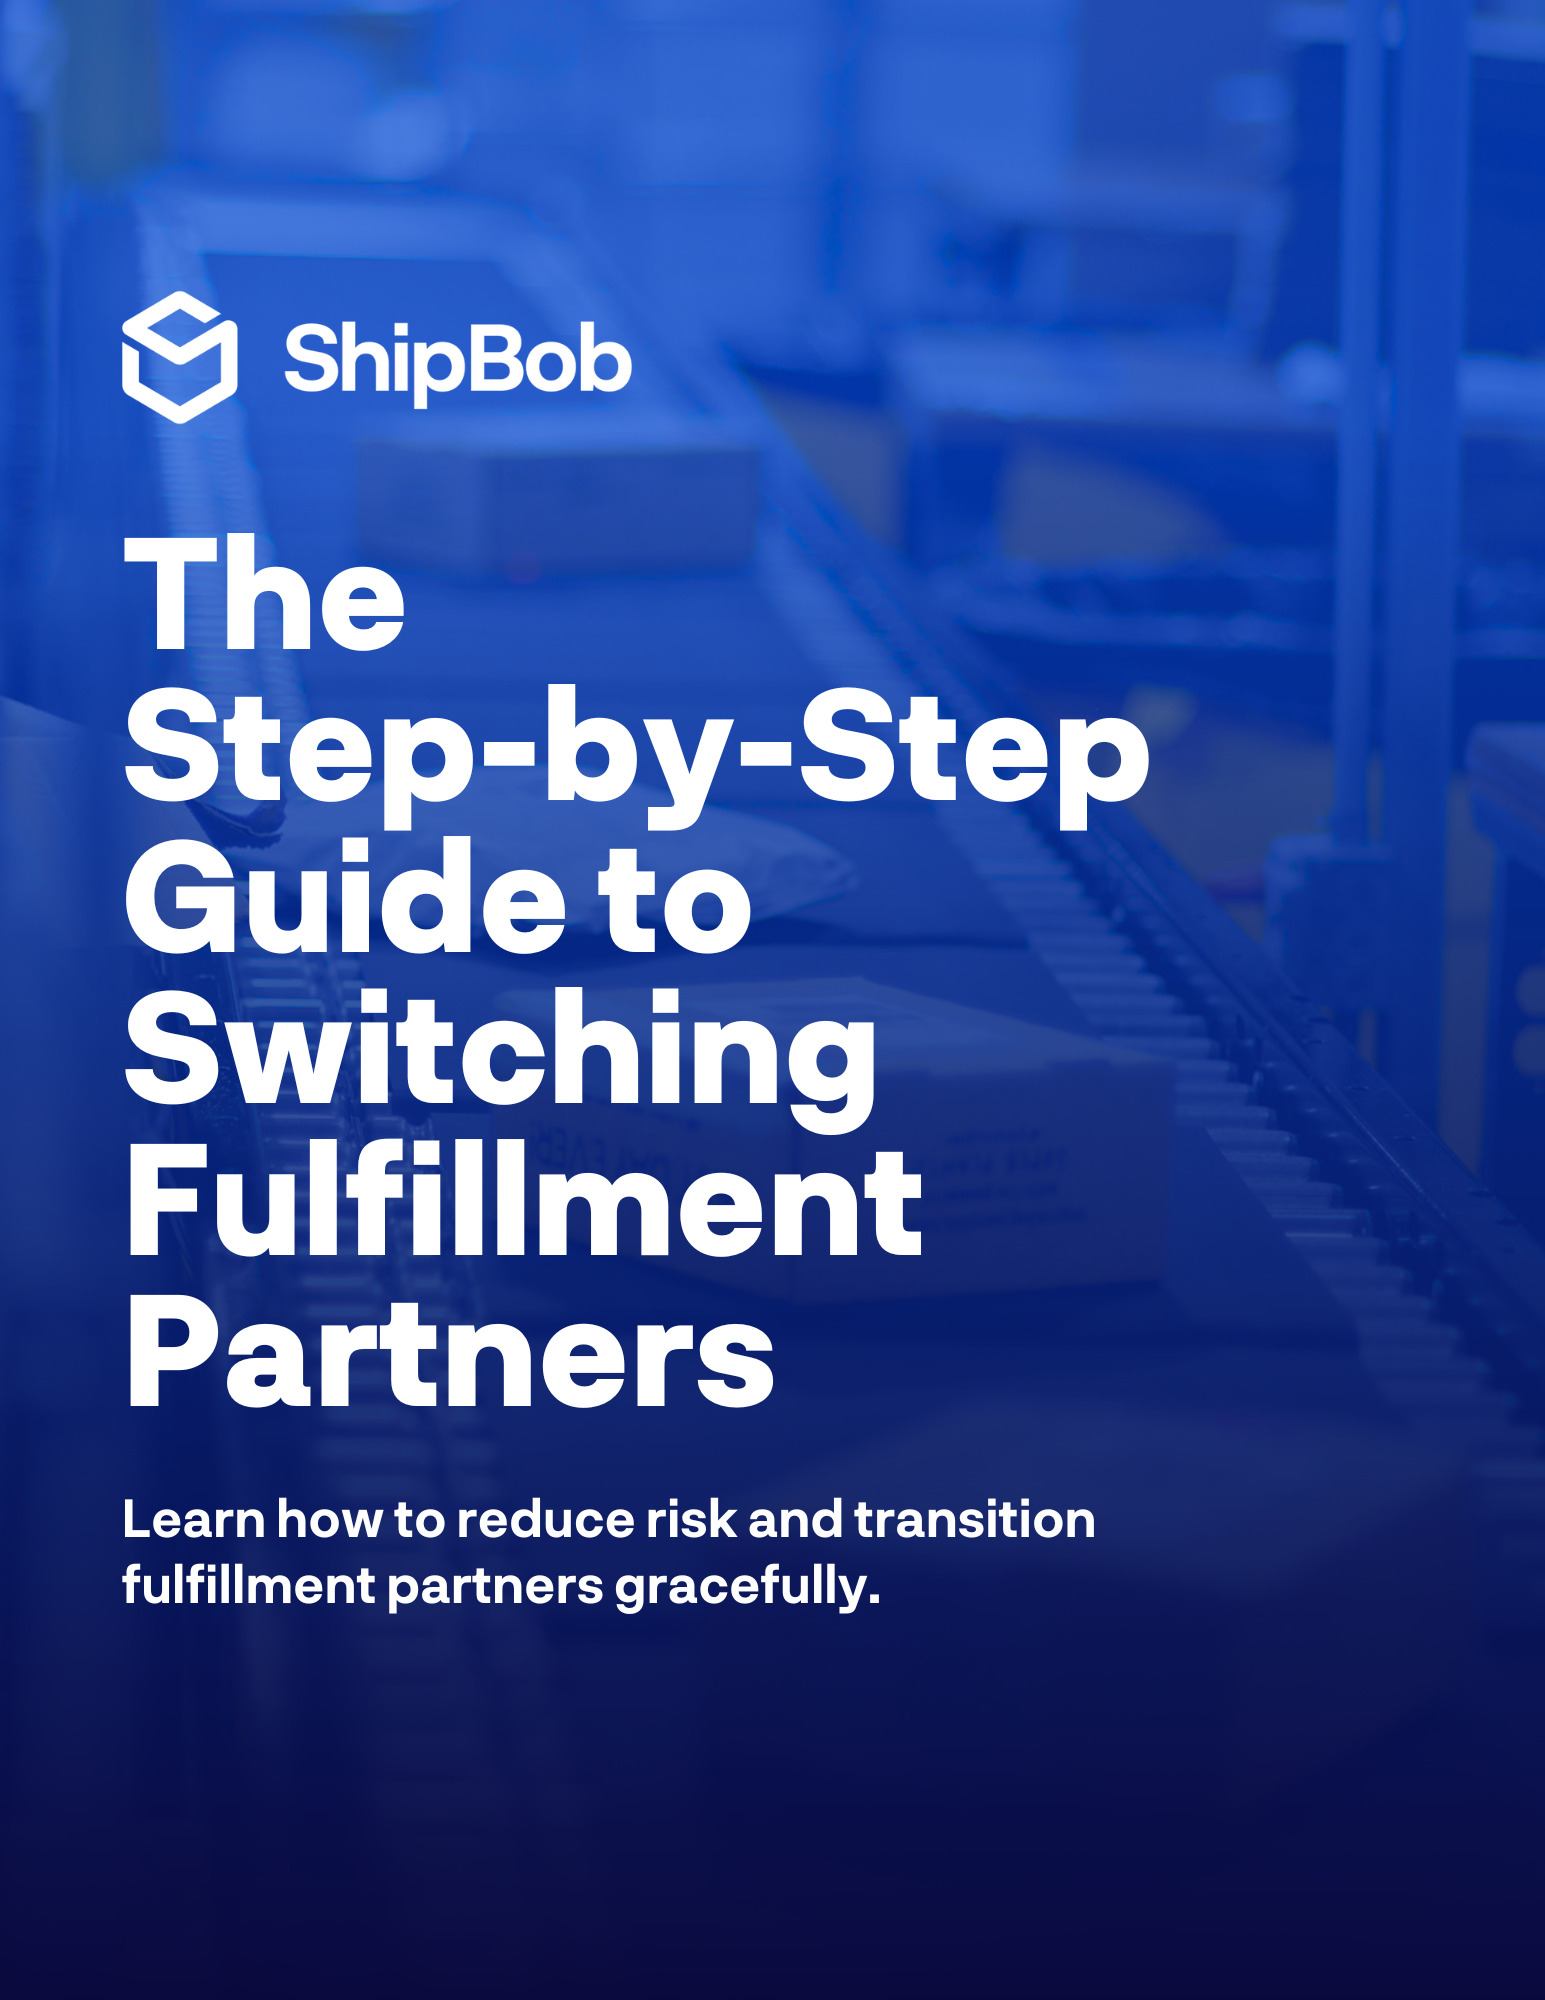 US Switching Fulfillment Partners Guide -1